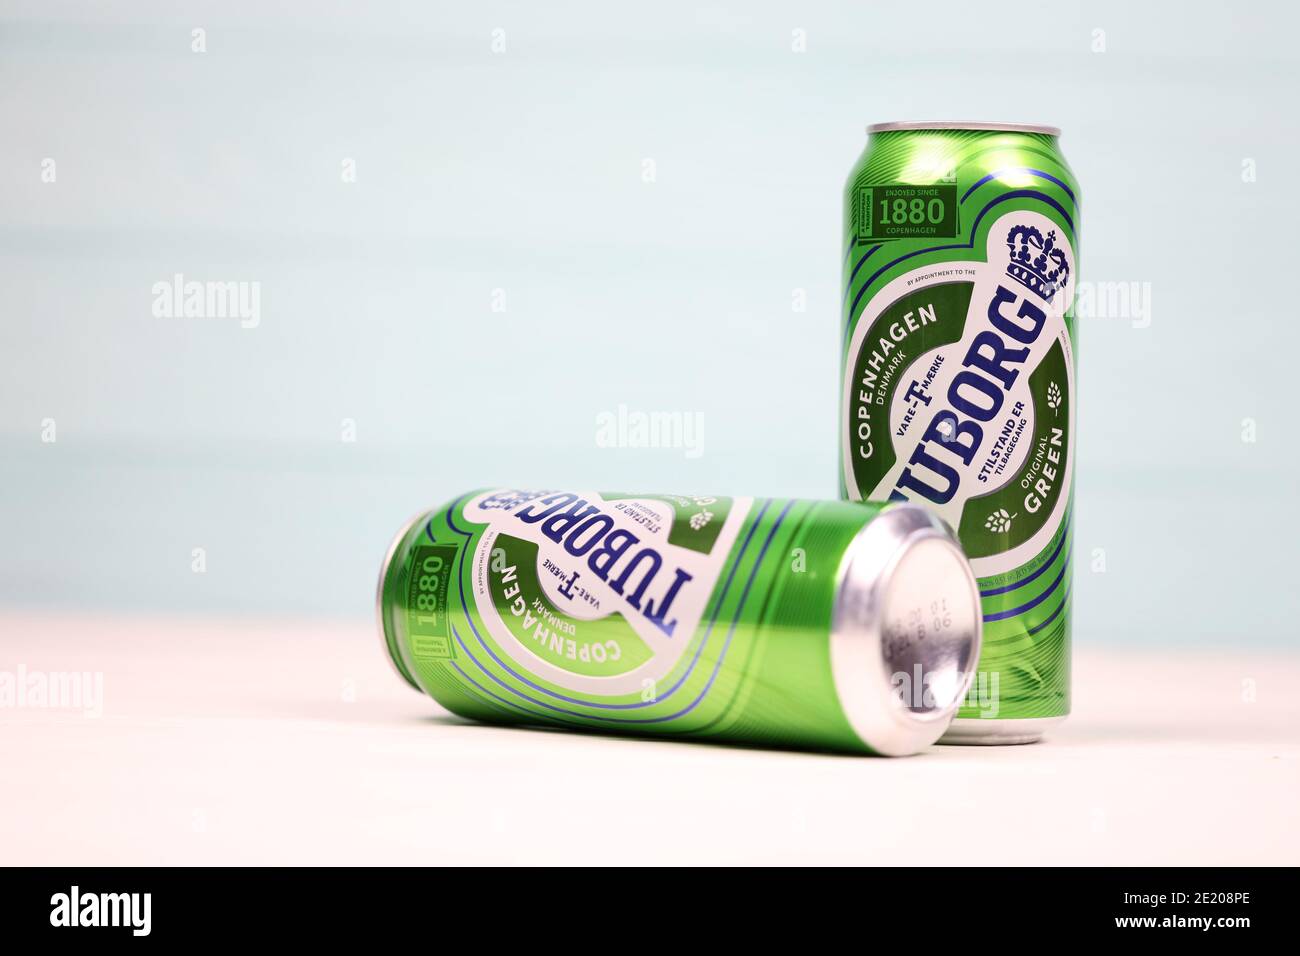 KHARKOV, UKRAINE - DECEMBER 8, 2020: Aluminium cans of green Tuborg beer on wooden background. Tuborg is a Danish brewing company founded in 1873 Stock Photo